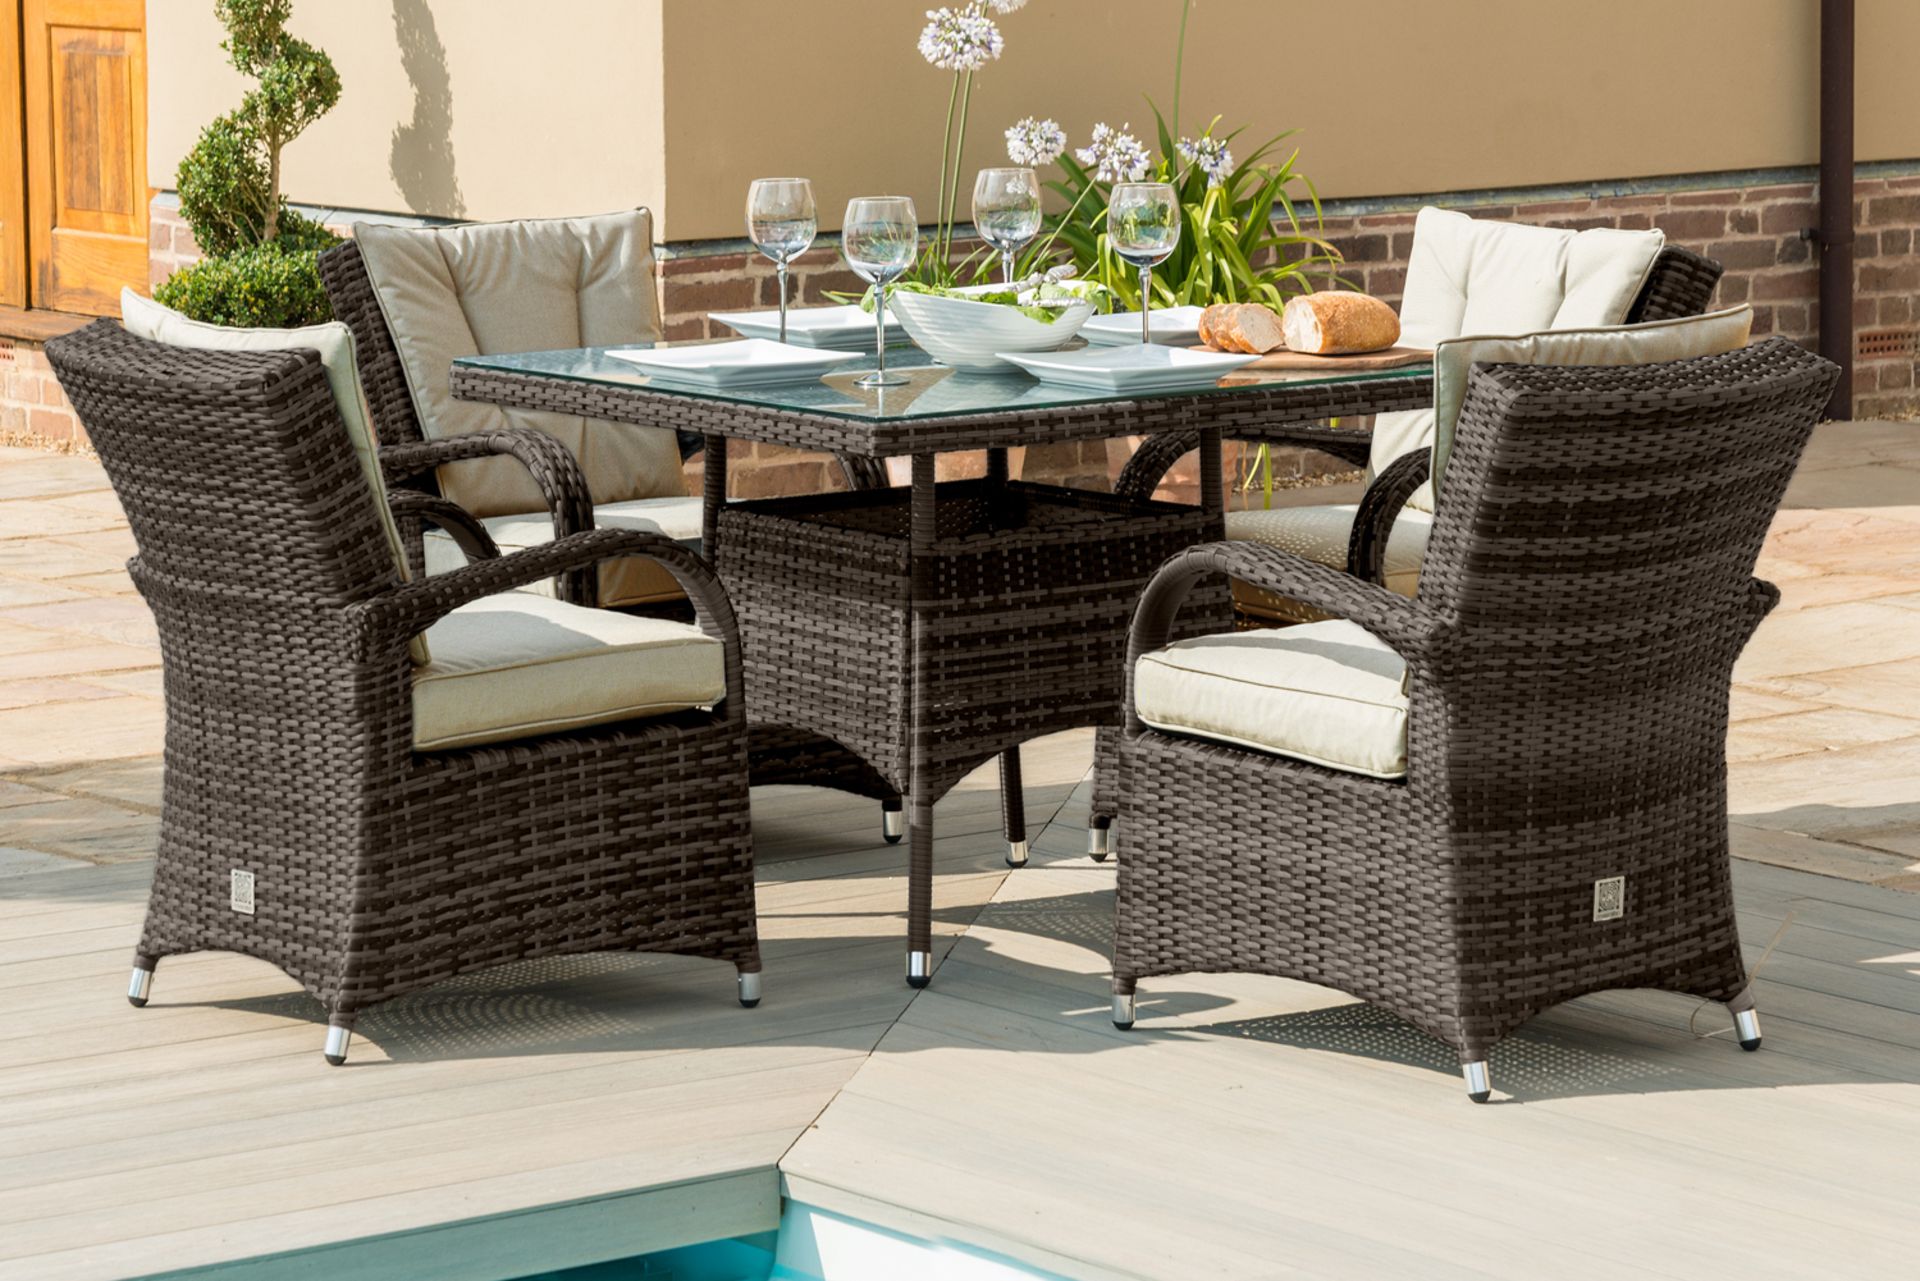 Rattan Texas 4 Seat Square Dining Set (Brown) *BRAND NEW*